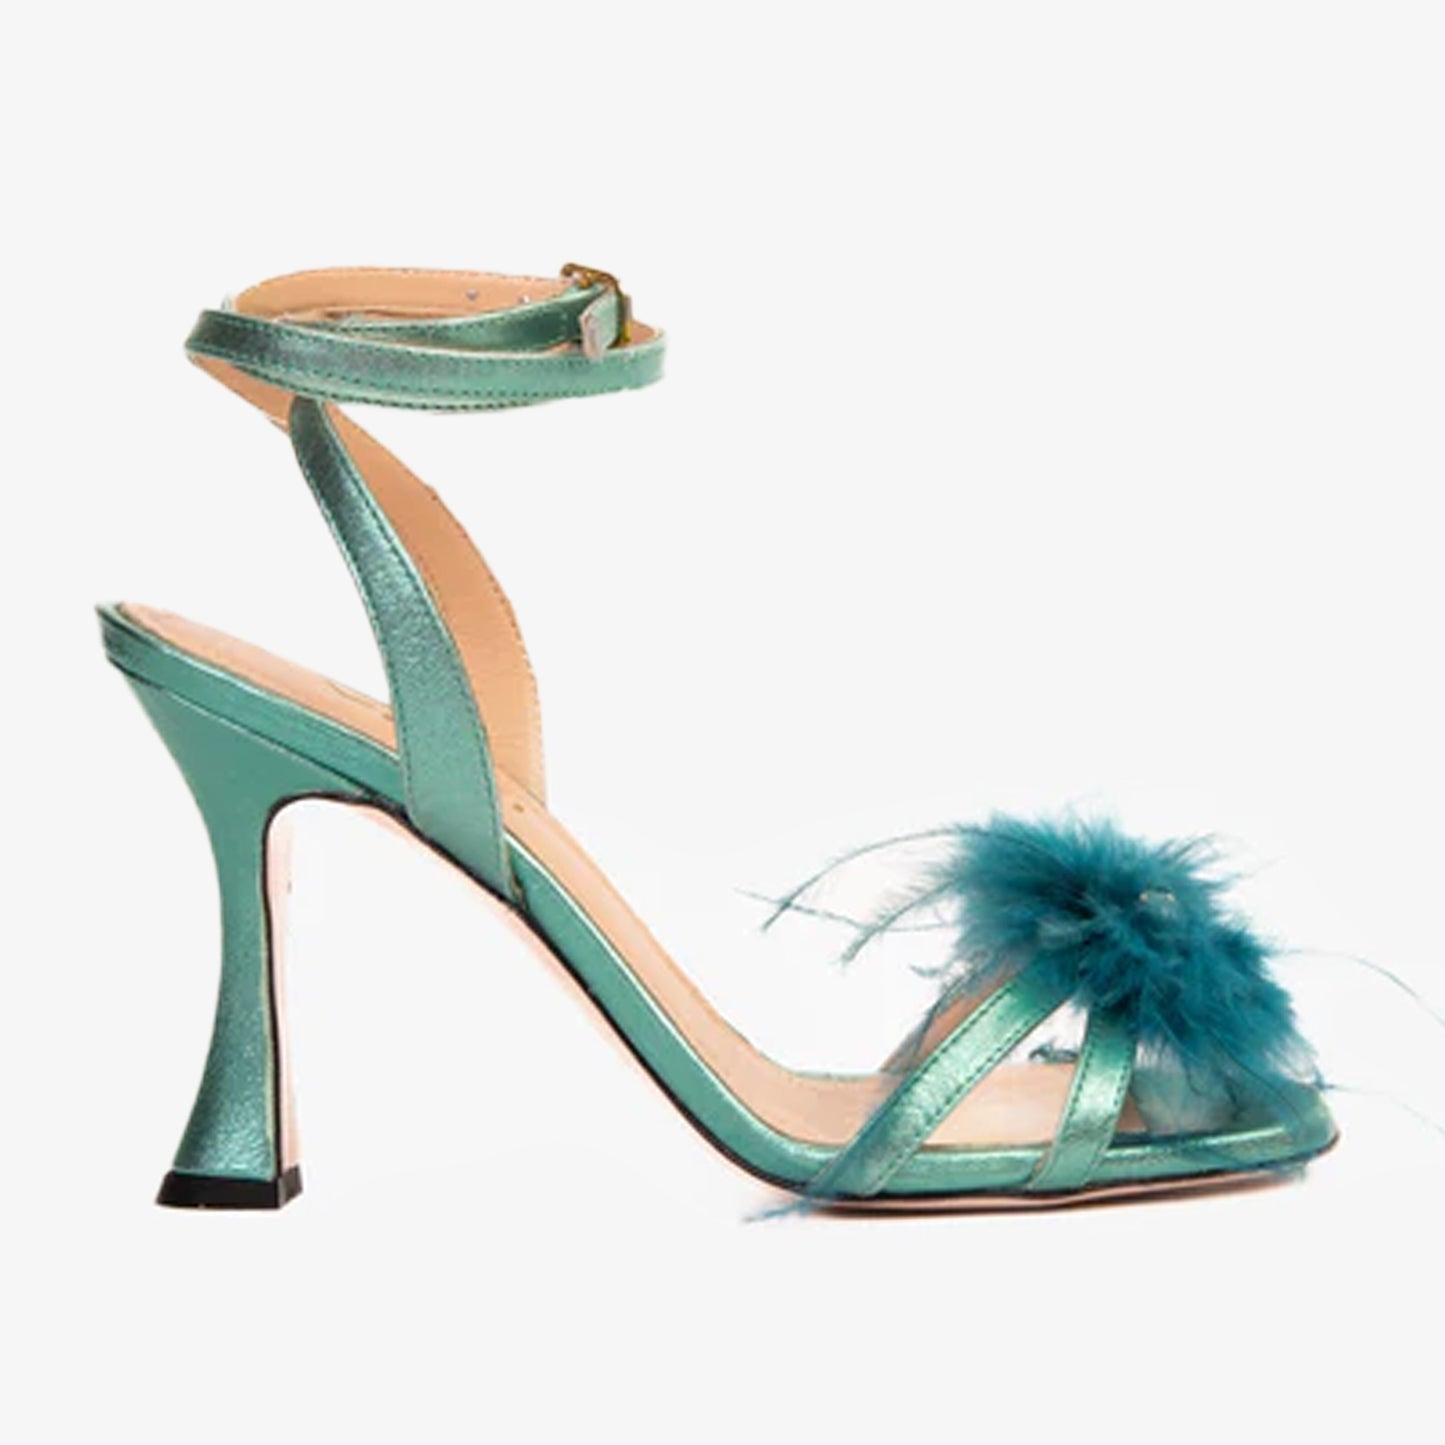 The Siena Turquoise Leather Ankle Strap Plumed Women Sandal